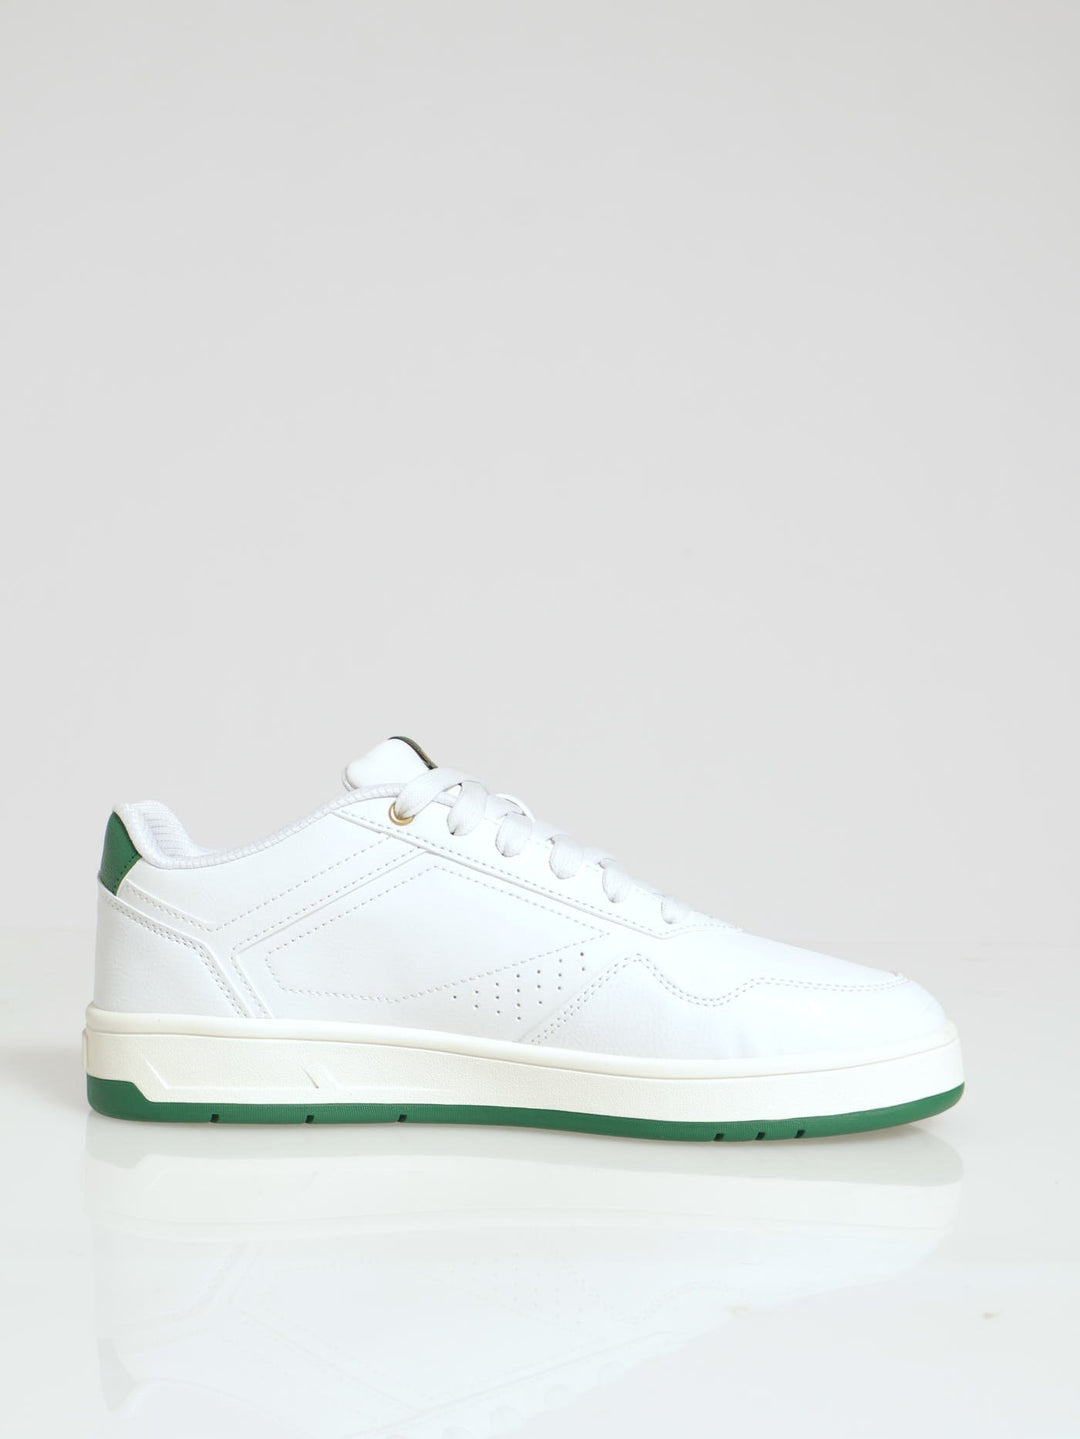 Court Classic Closed Toe Lace Up Sneaker - White/Green